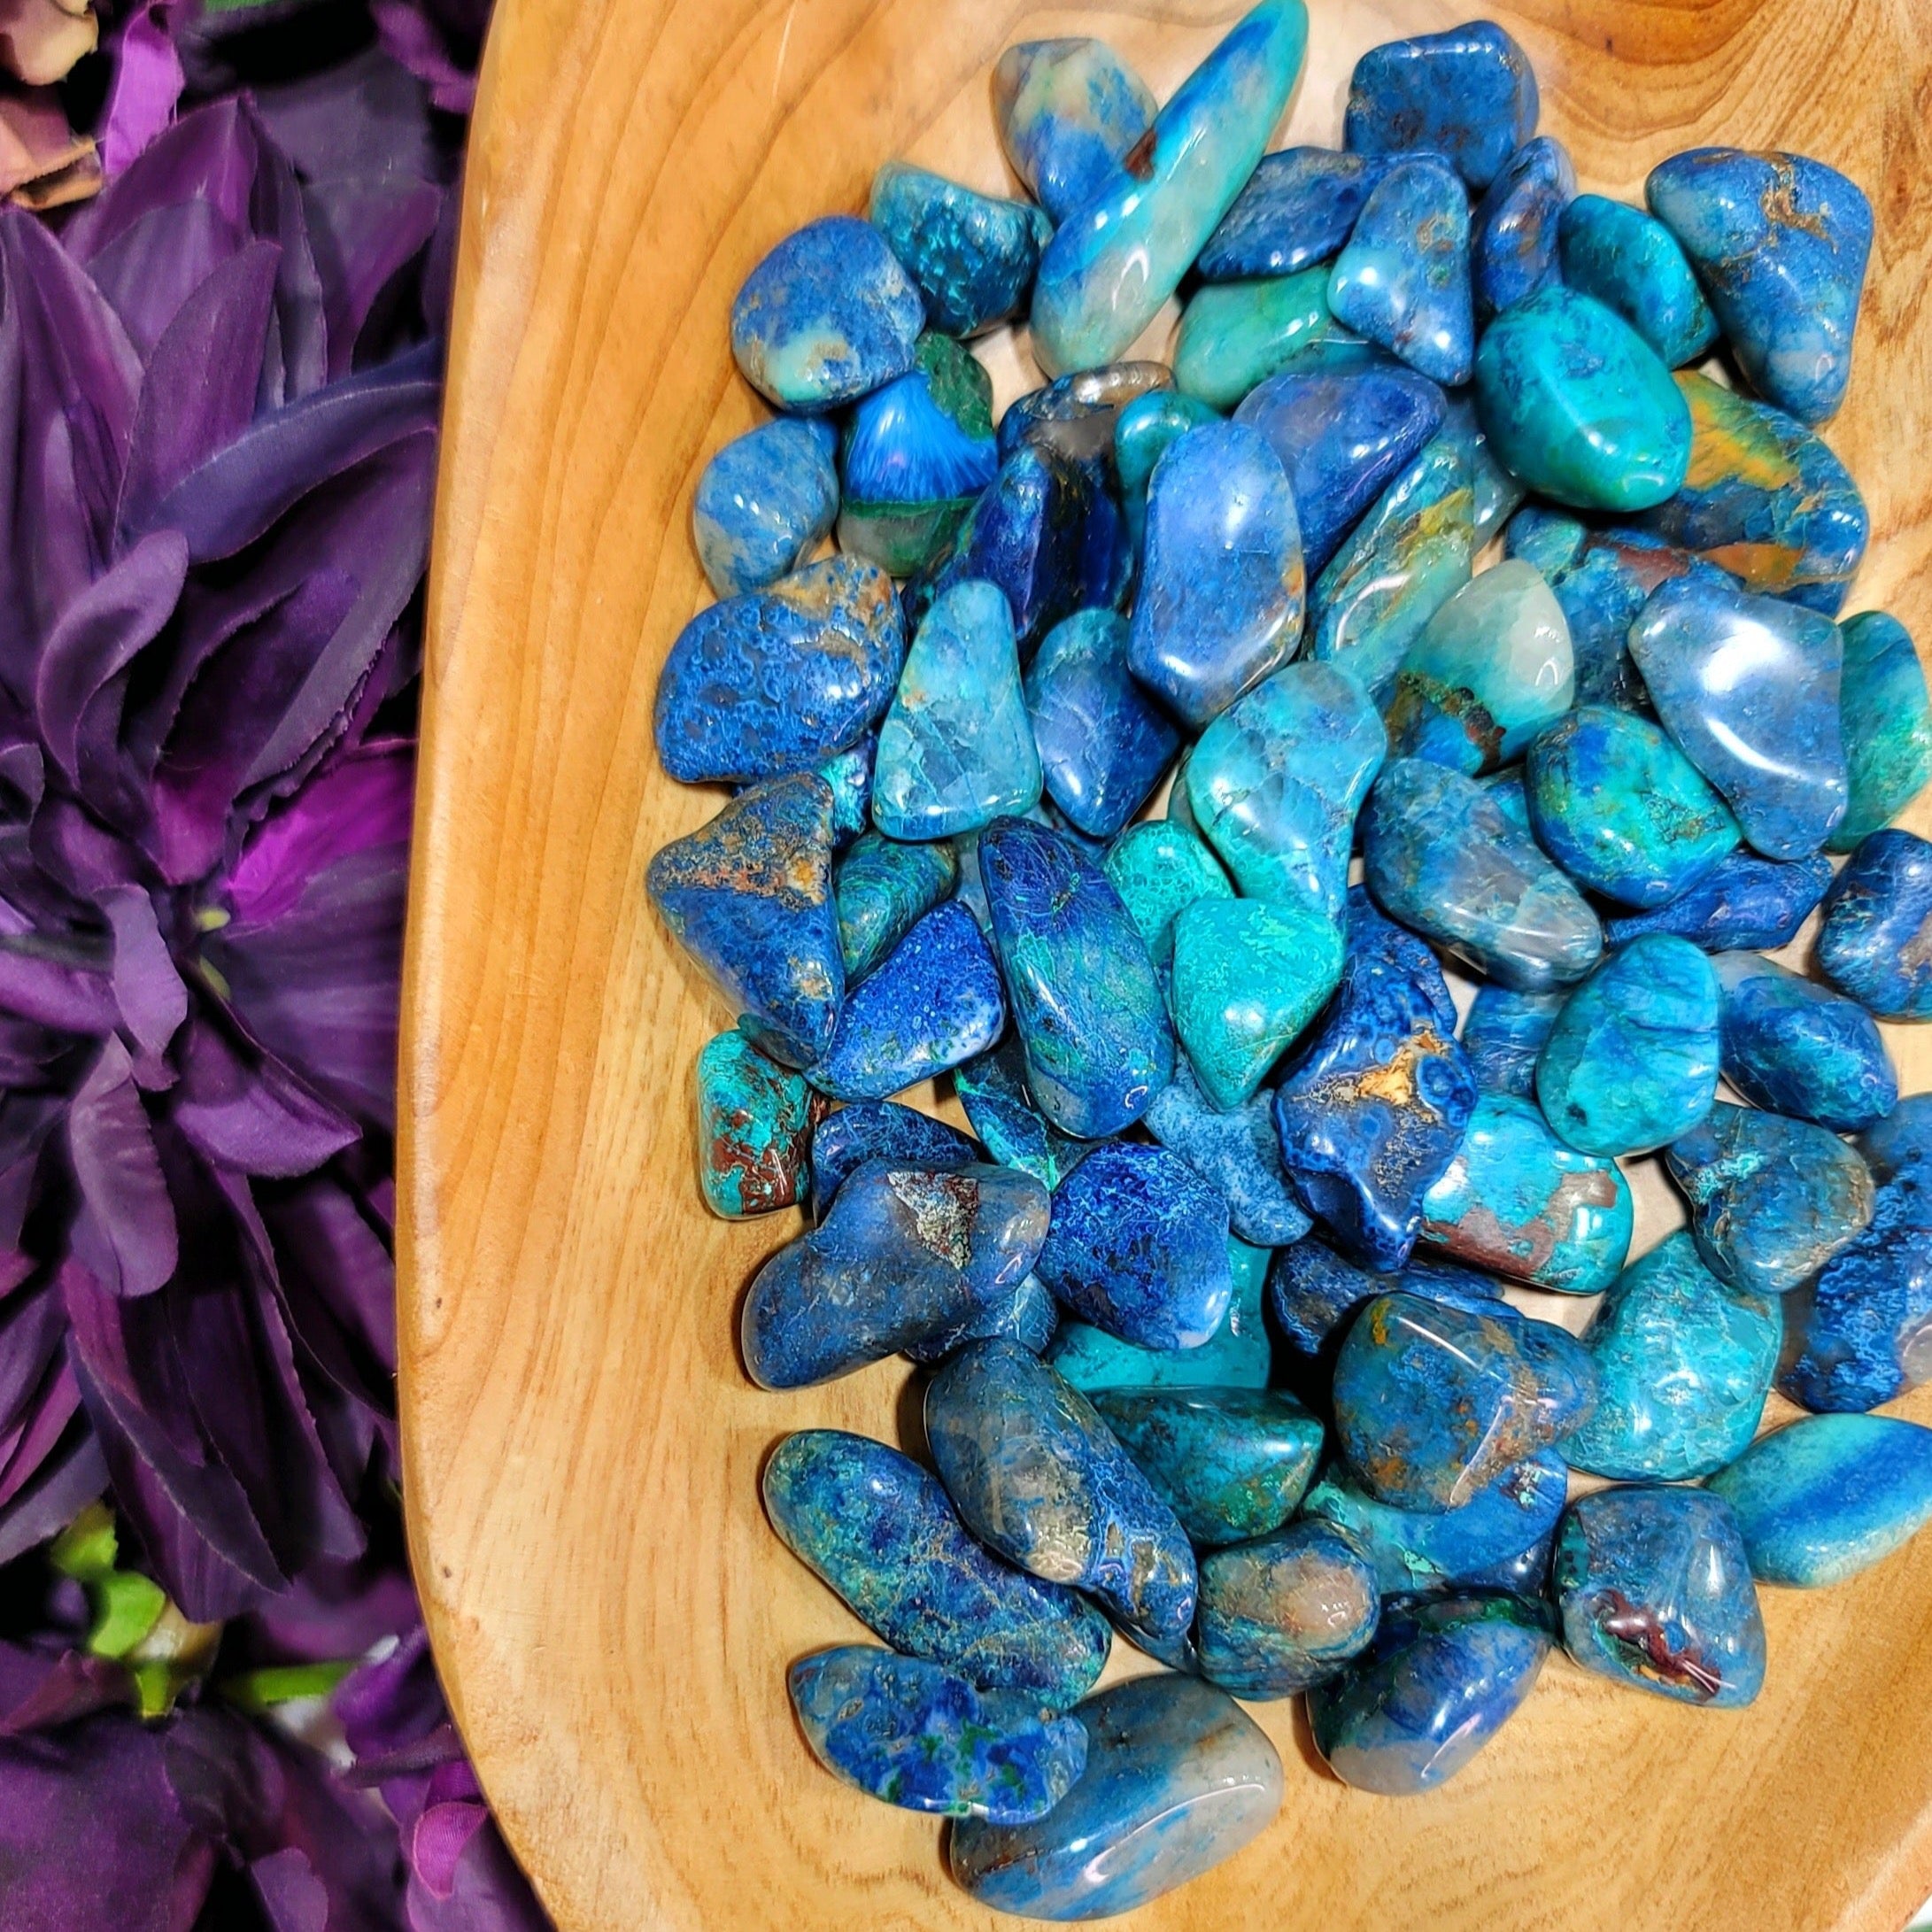 Shattuckite with Chrysocolla Tumble for Communication, Empowerment, and Truth